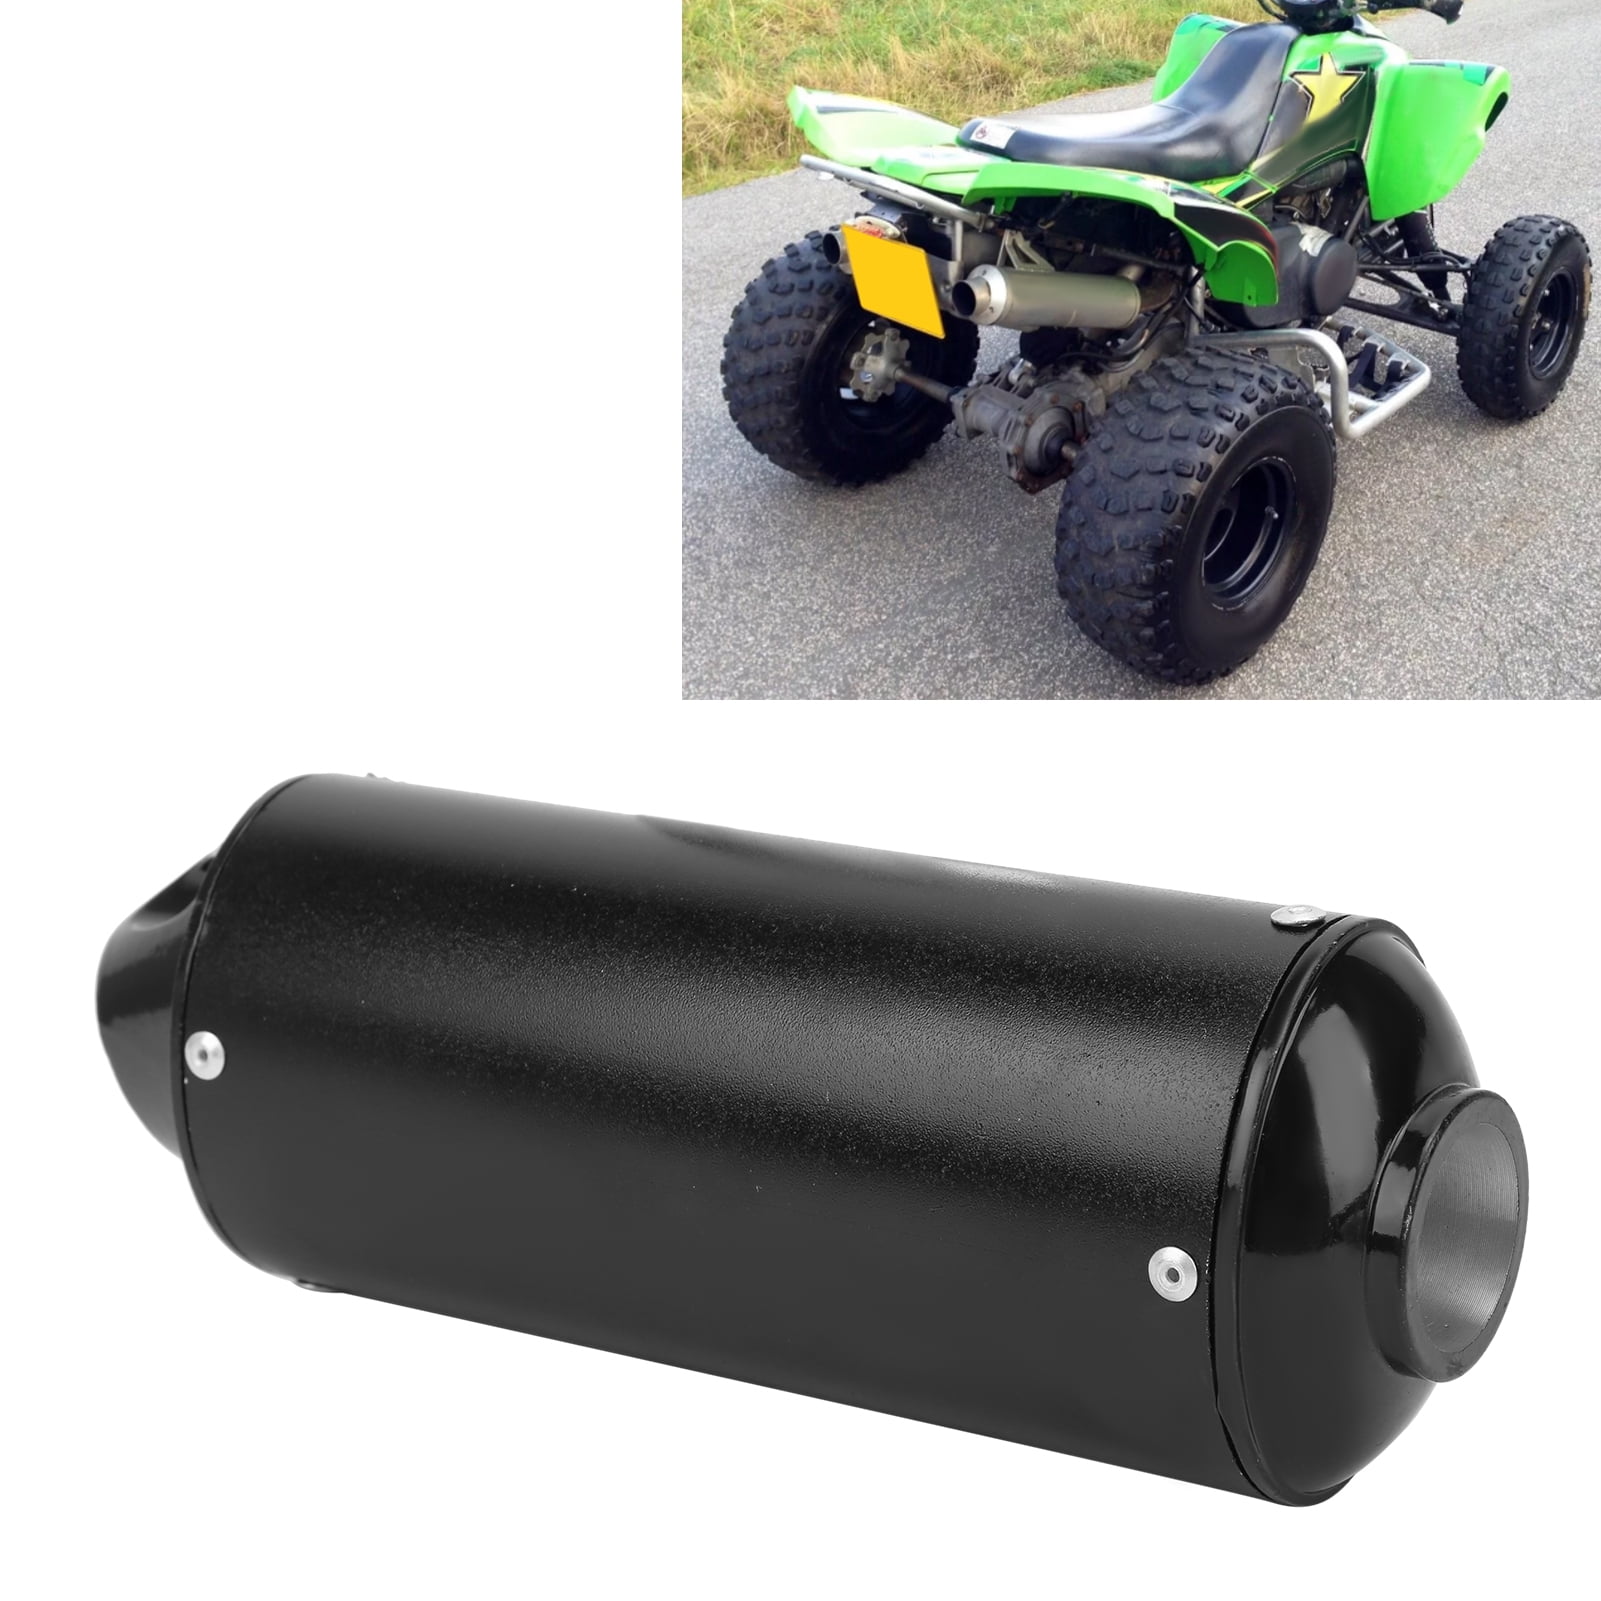 Motorcycle Exhaust Tip 32mm Exhaust Silencer Fit for 90cc 110cc 125cc 150cc 160cc ATV Pit Bike Motorcycle 1.3in Exhaust Pipe Muffler Silencer 